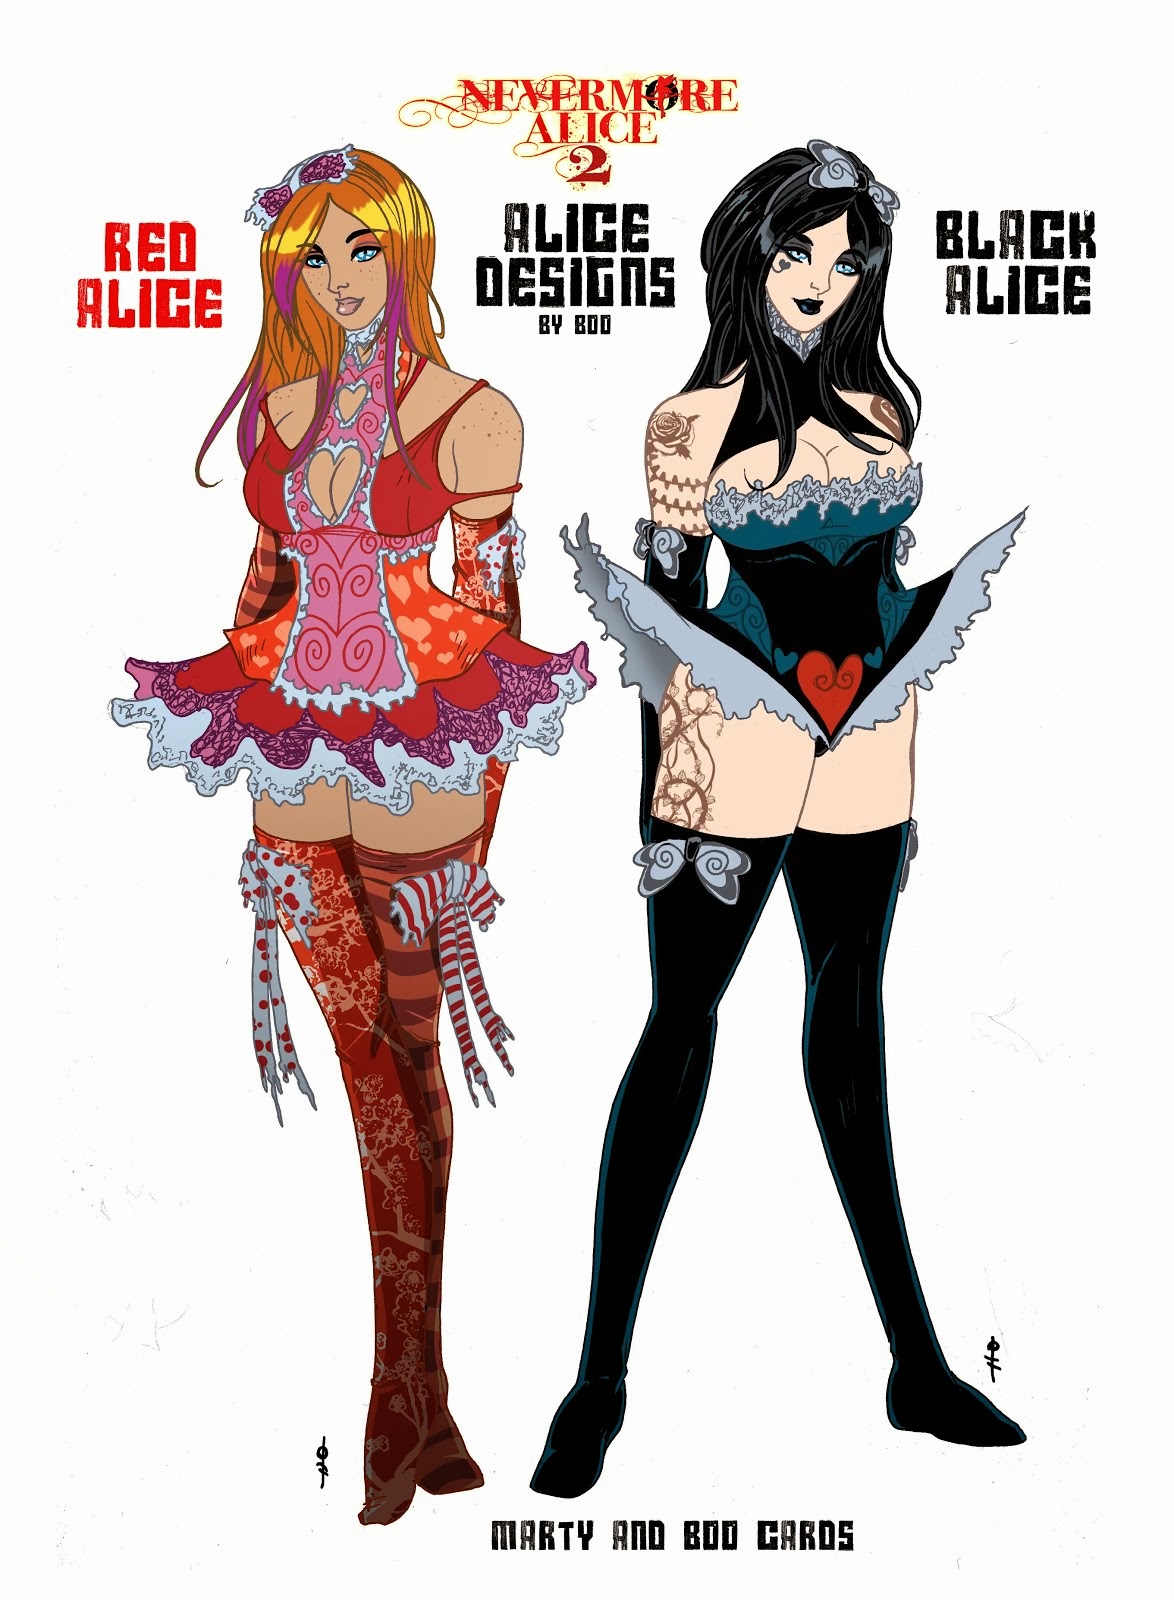 Black Alice and Red Alice